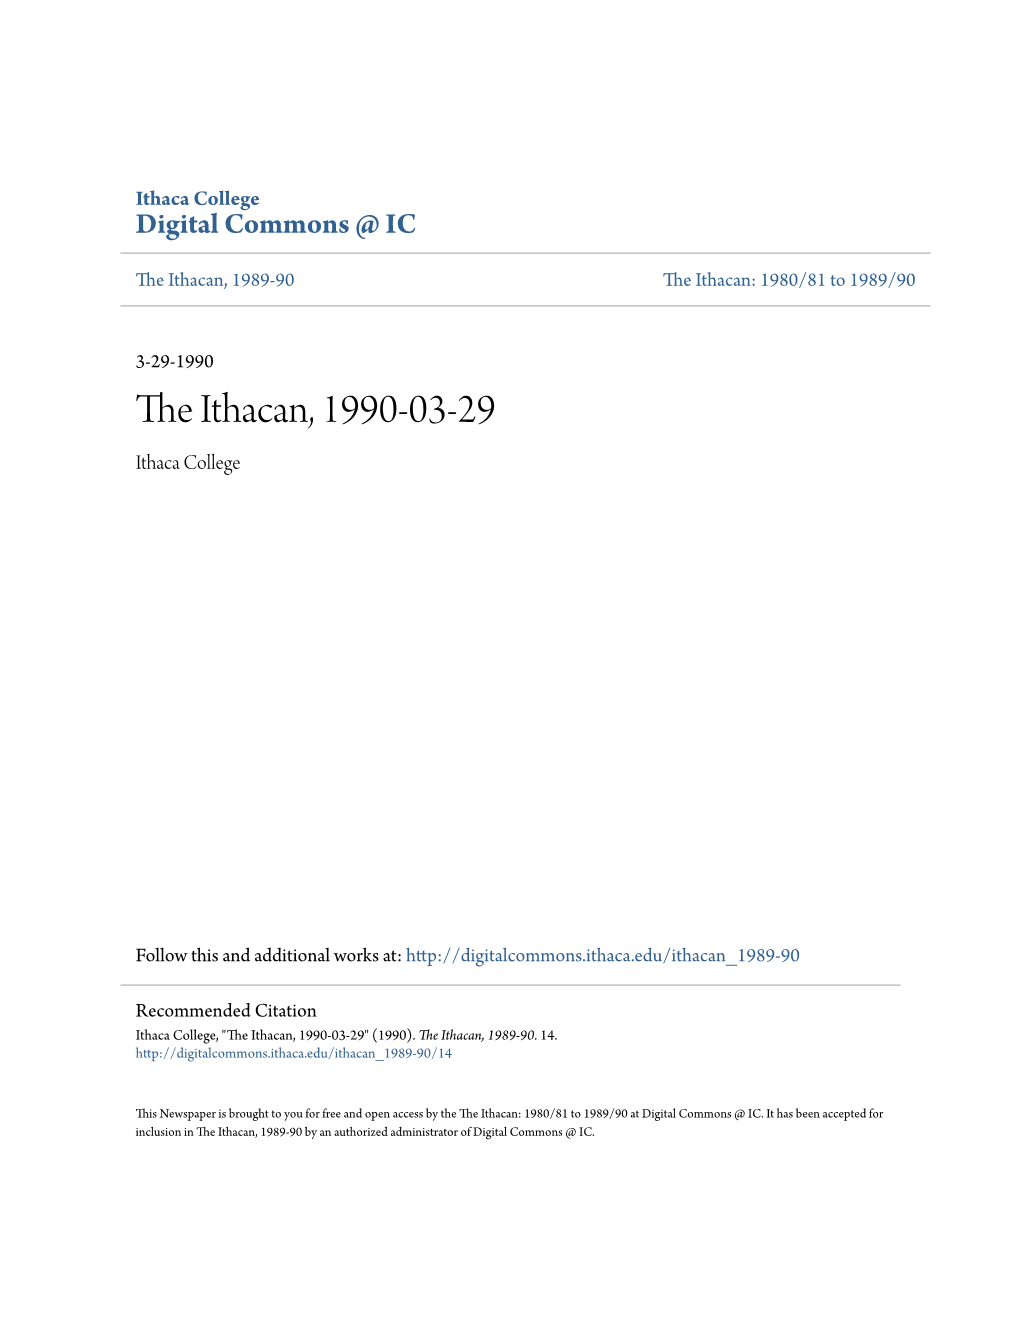 The Ithacan, 1990-03-29